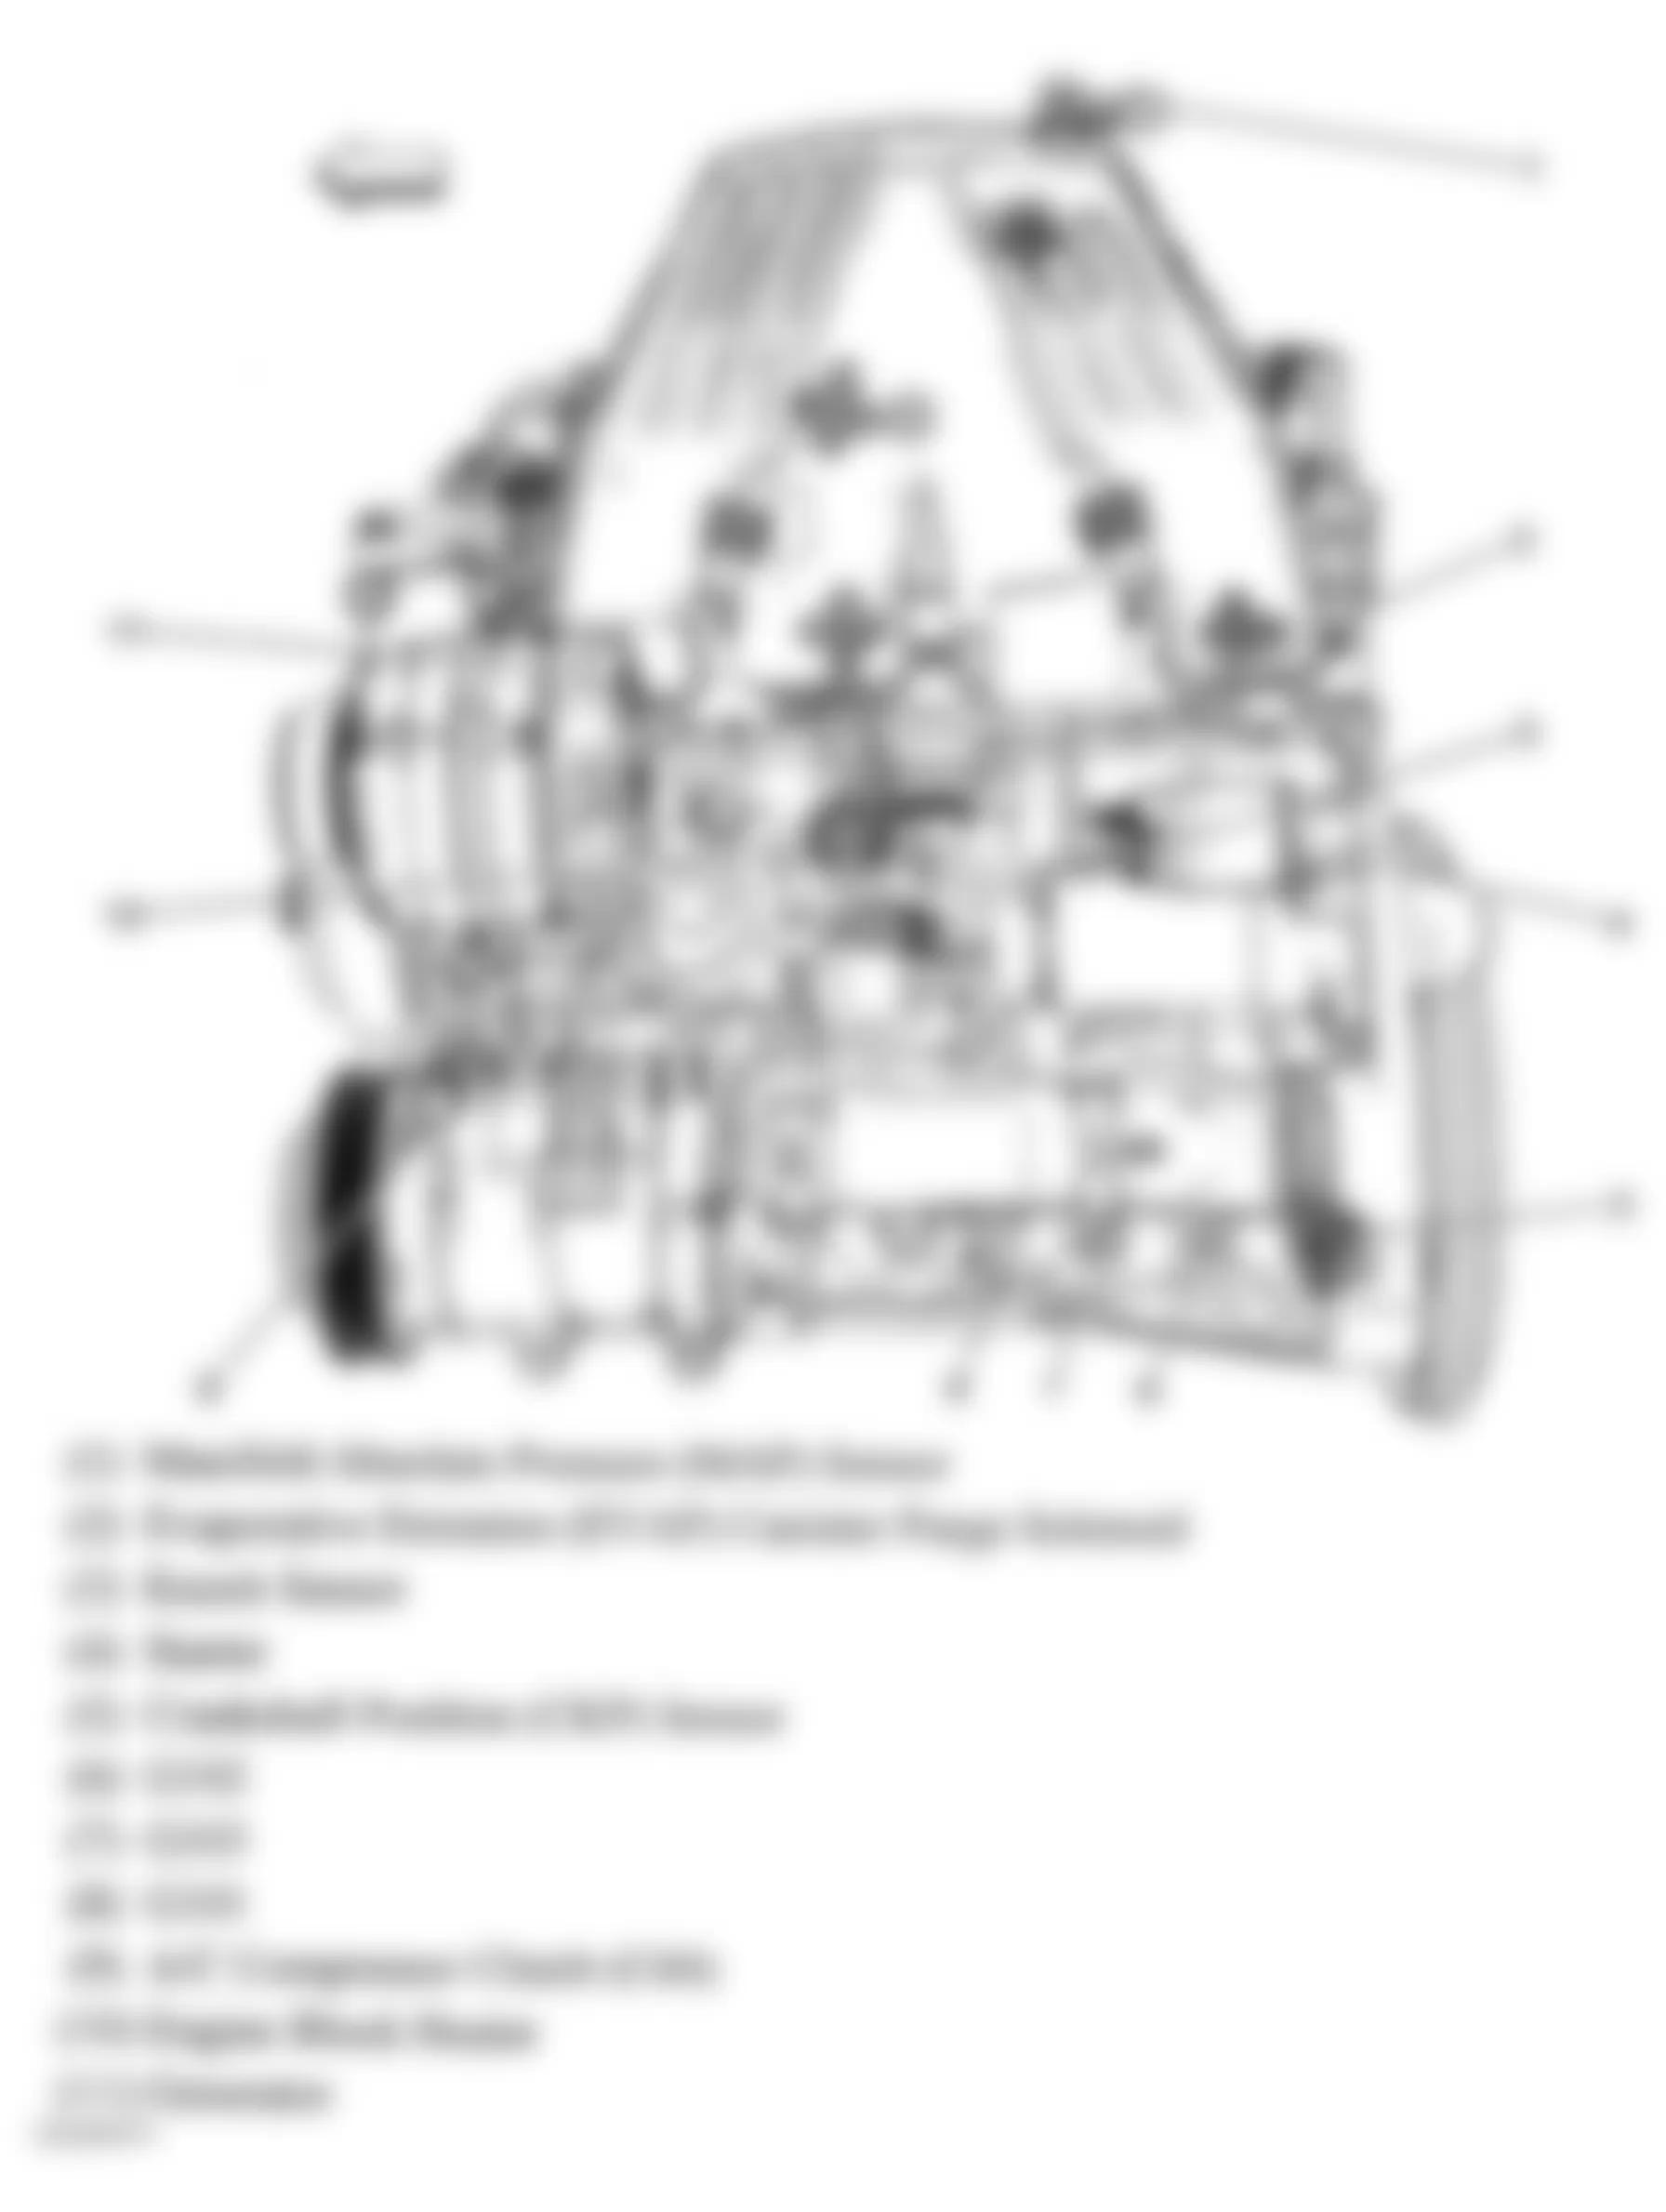 Chevrolet Colorado 2009 - Component Locations -  Left Side Of Engine (2.9L)